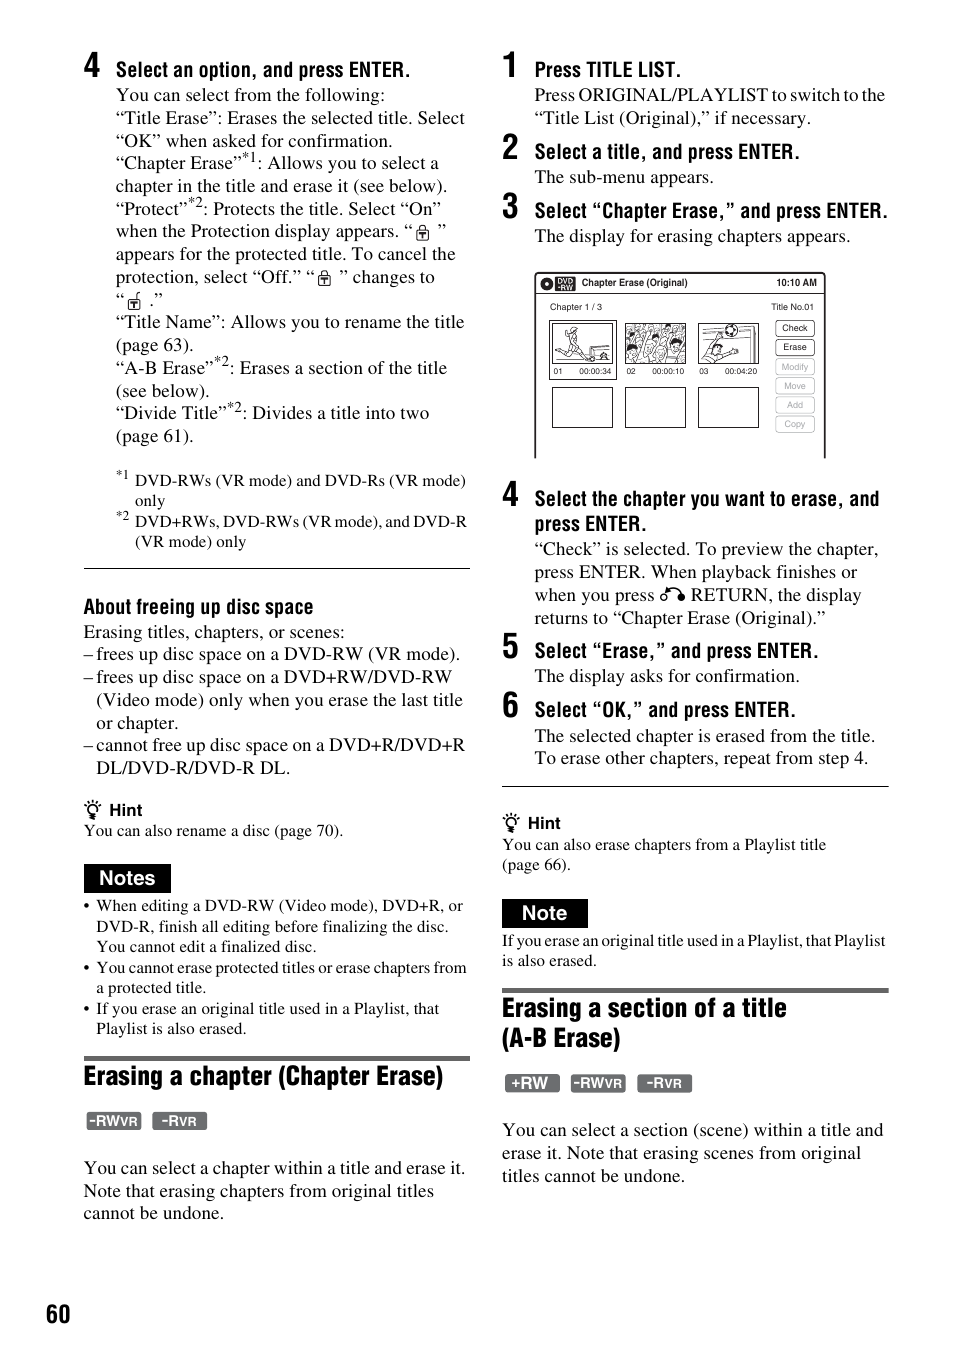 Erasing a chapter (chapter erase) | Sony RDR-VX521 User Manual | Page 60 / 132